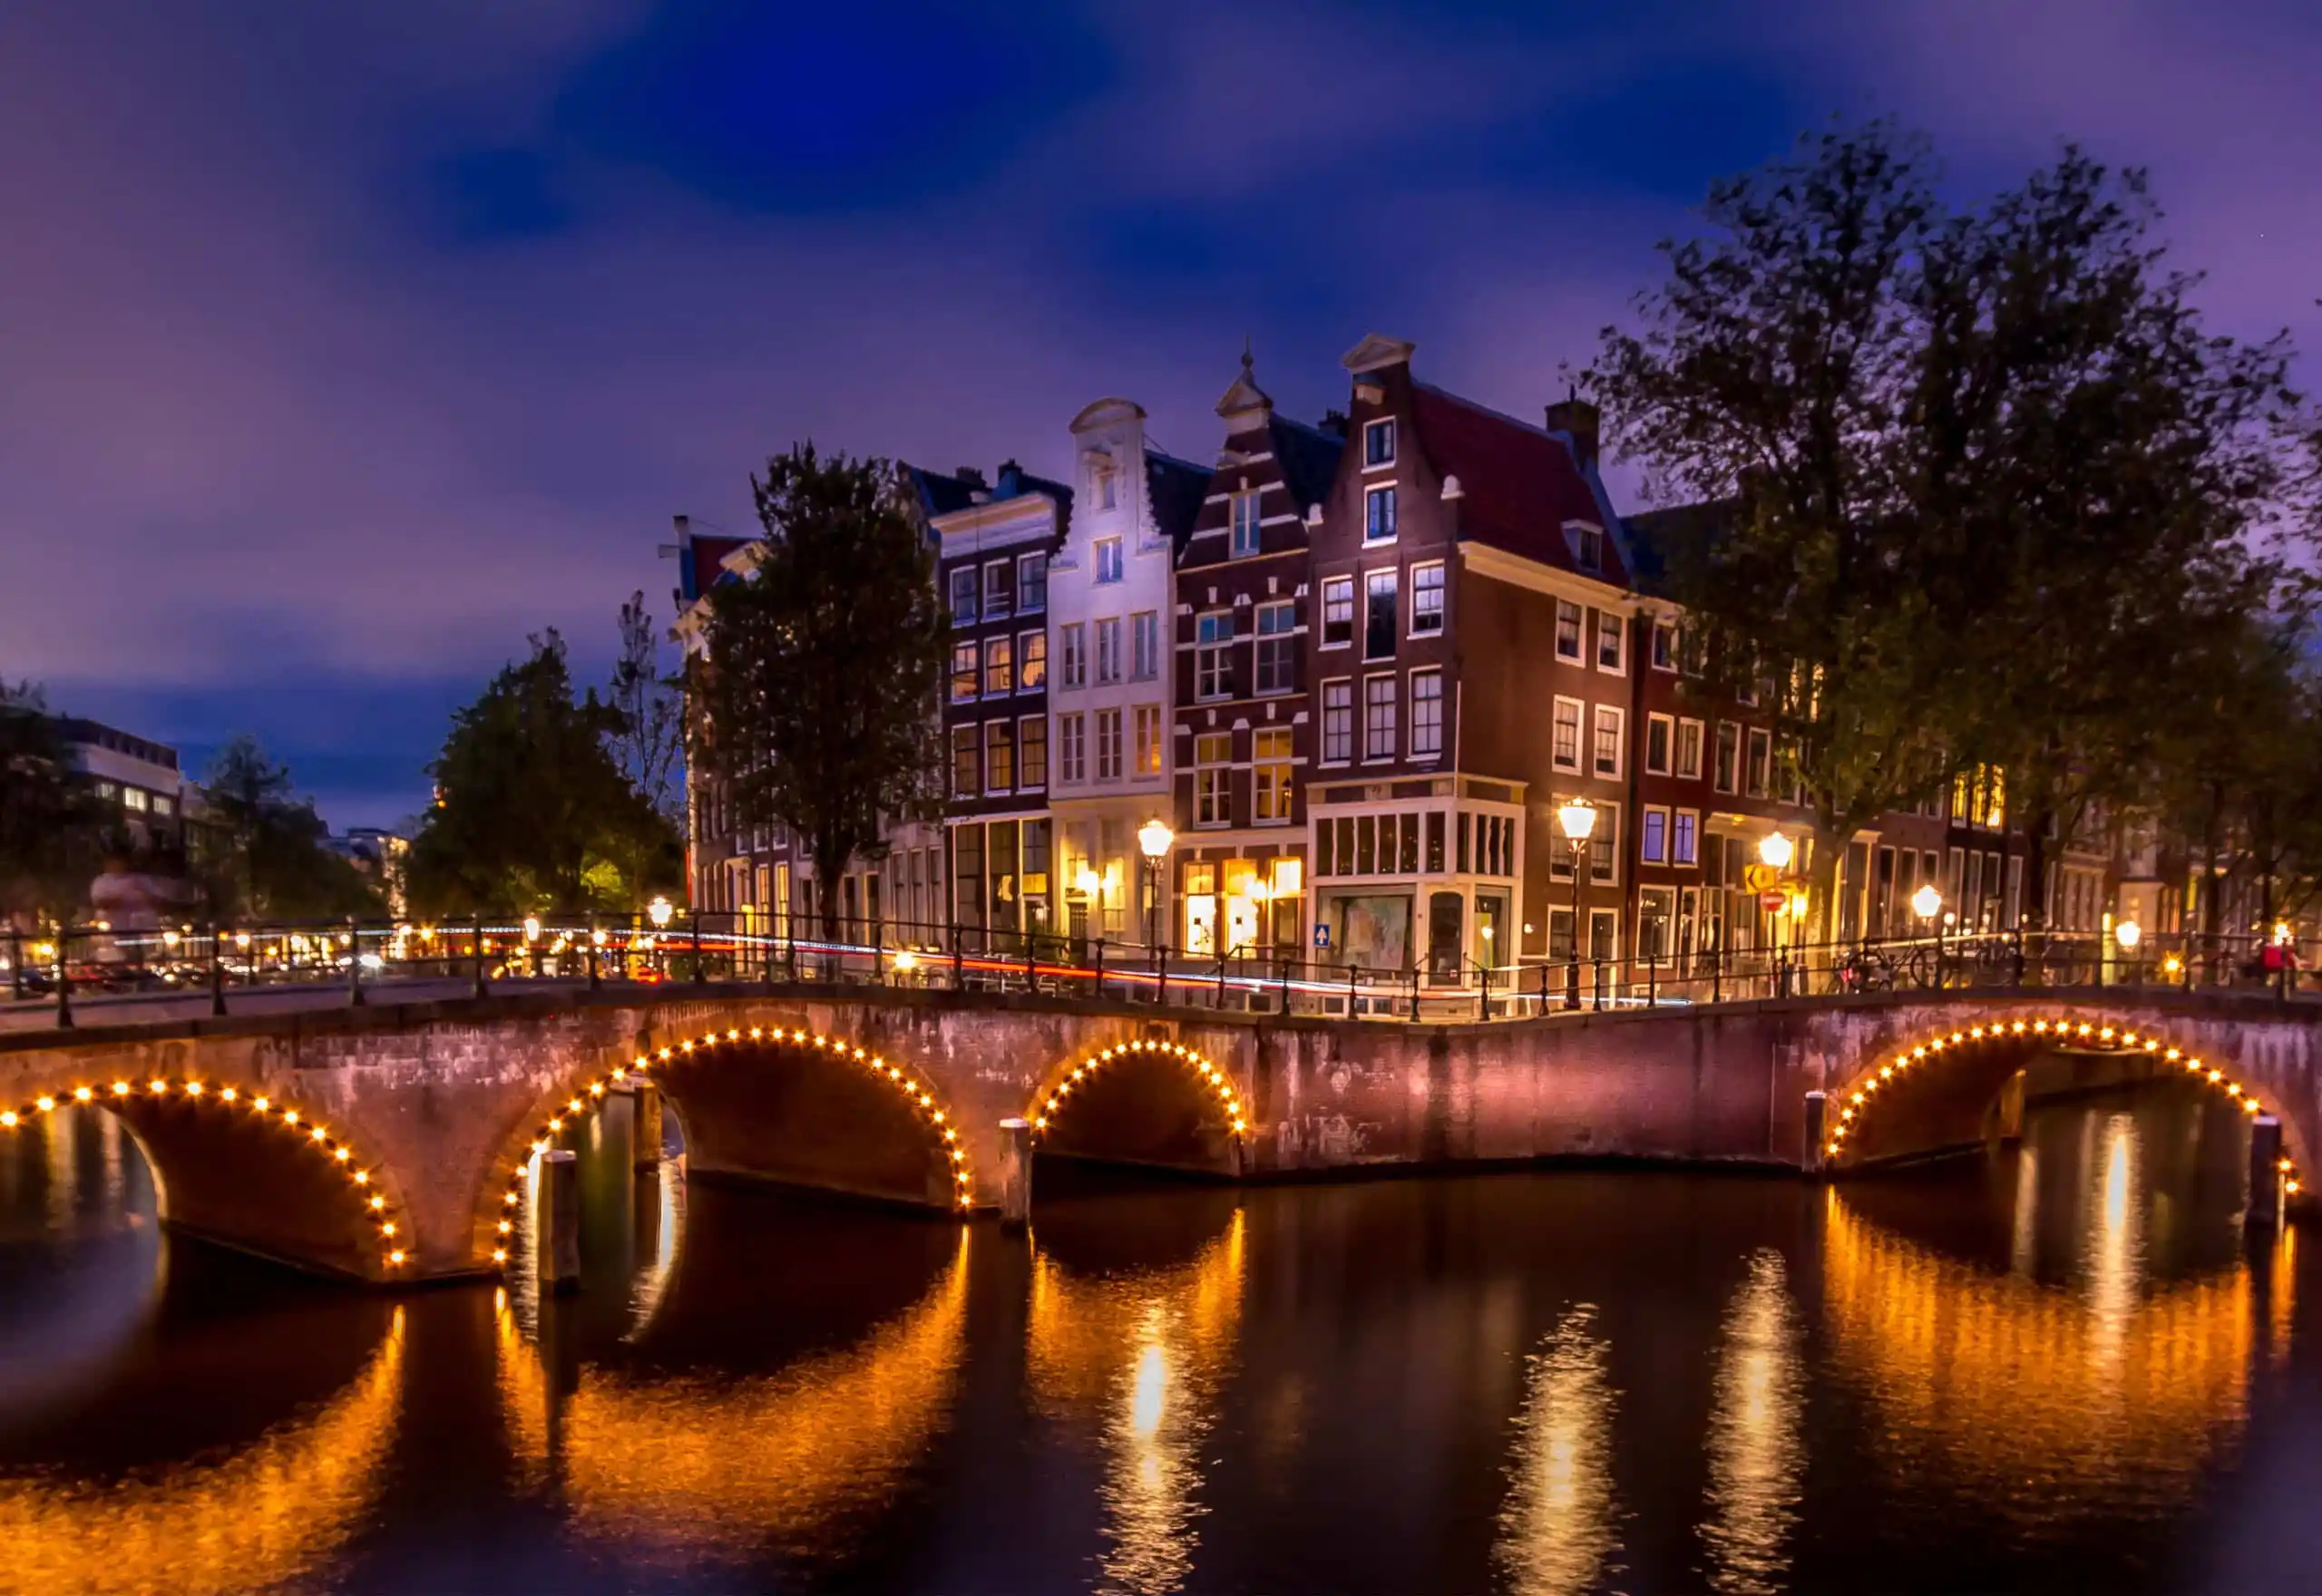 Construction and Civil Engineering Training Courses in Amsterdam